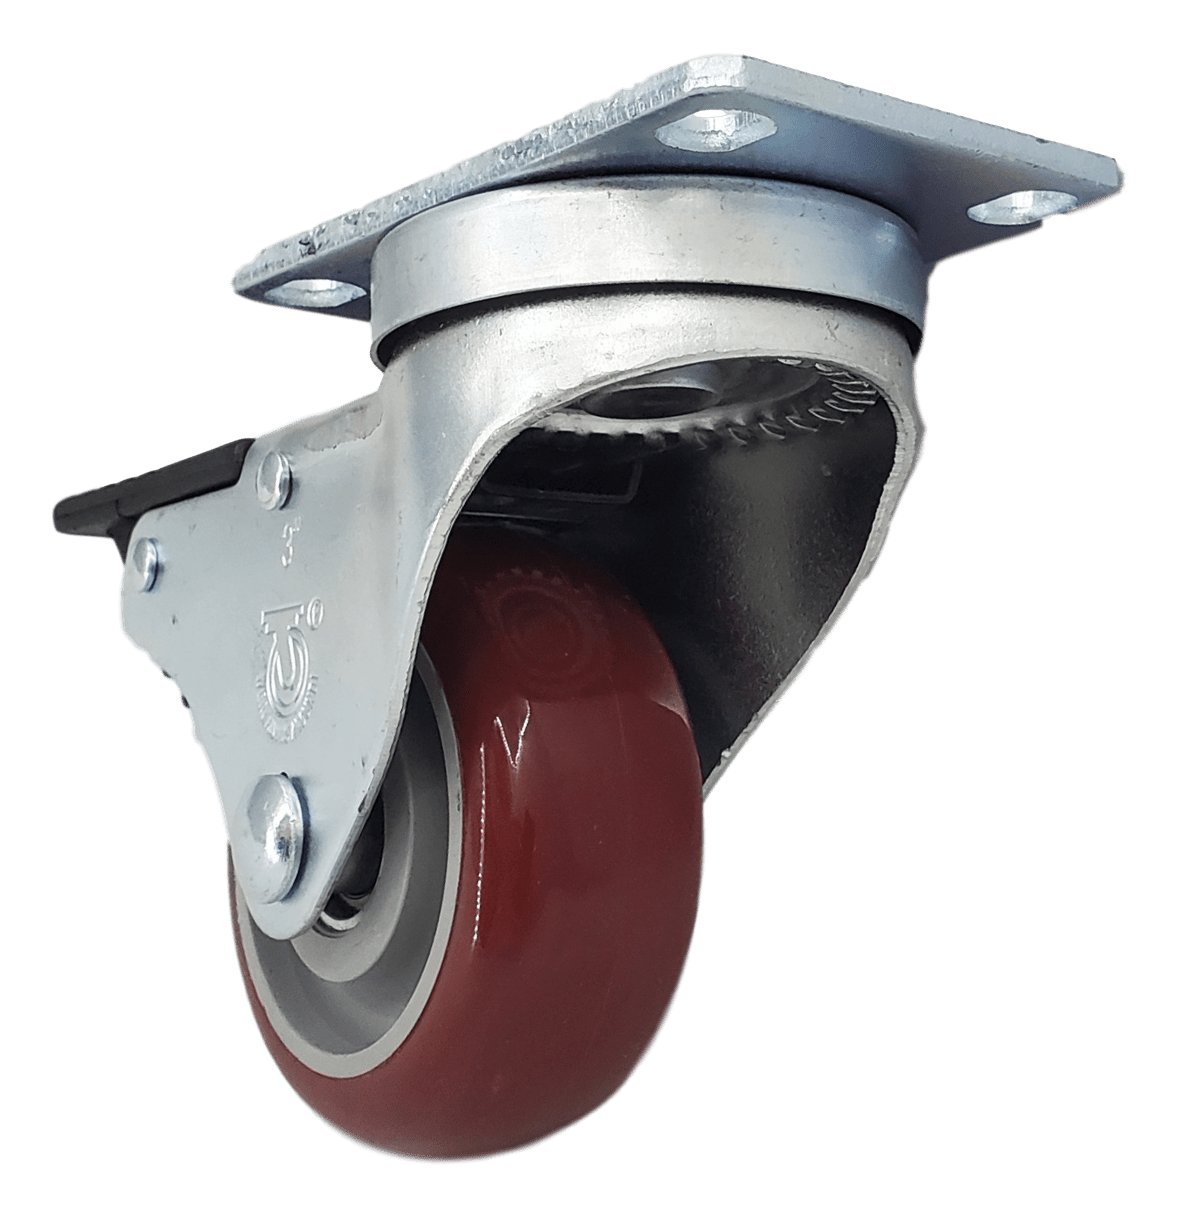 3" x 1-1/4" Polymadic Wheel Swivel Caster w/ Total Lock Brake - 300 Lbs. Capacity - Durable Superior Casters